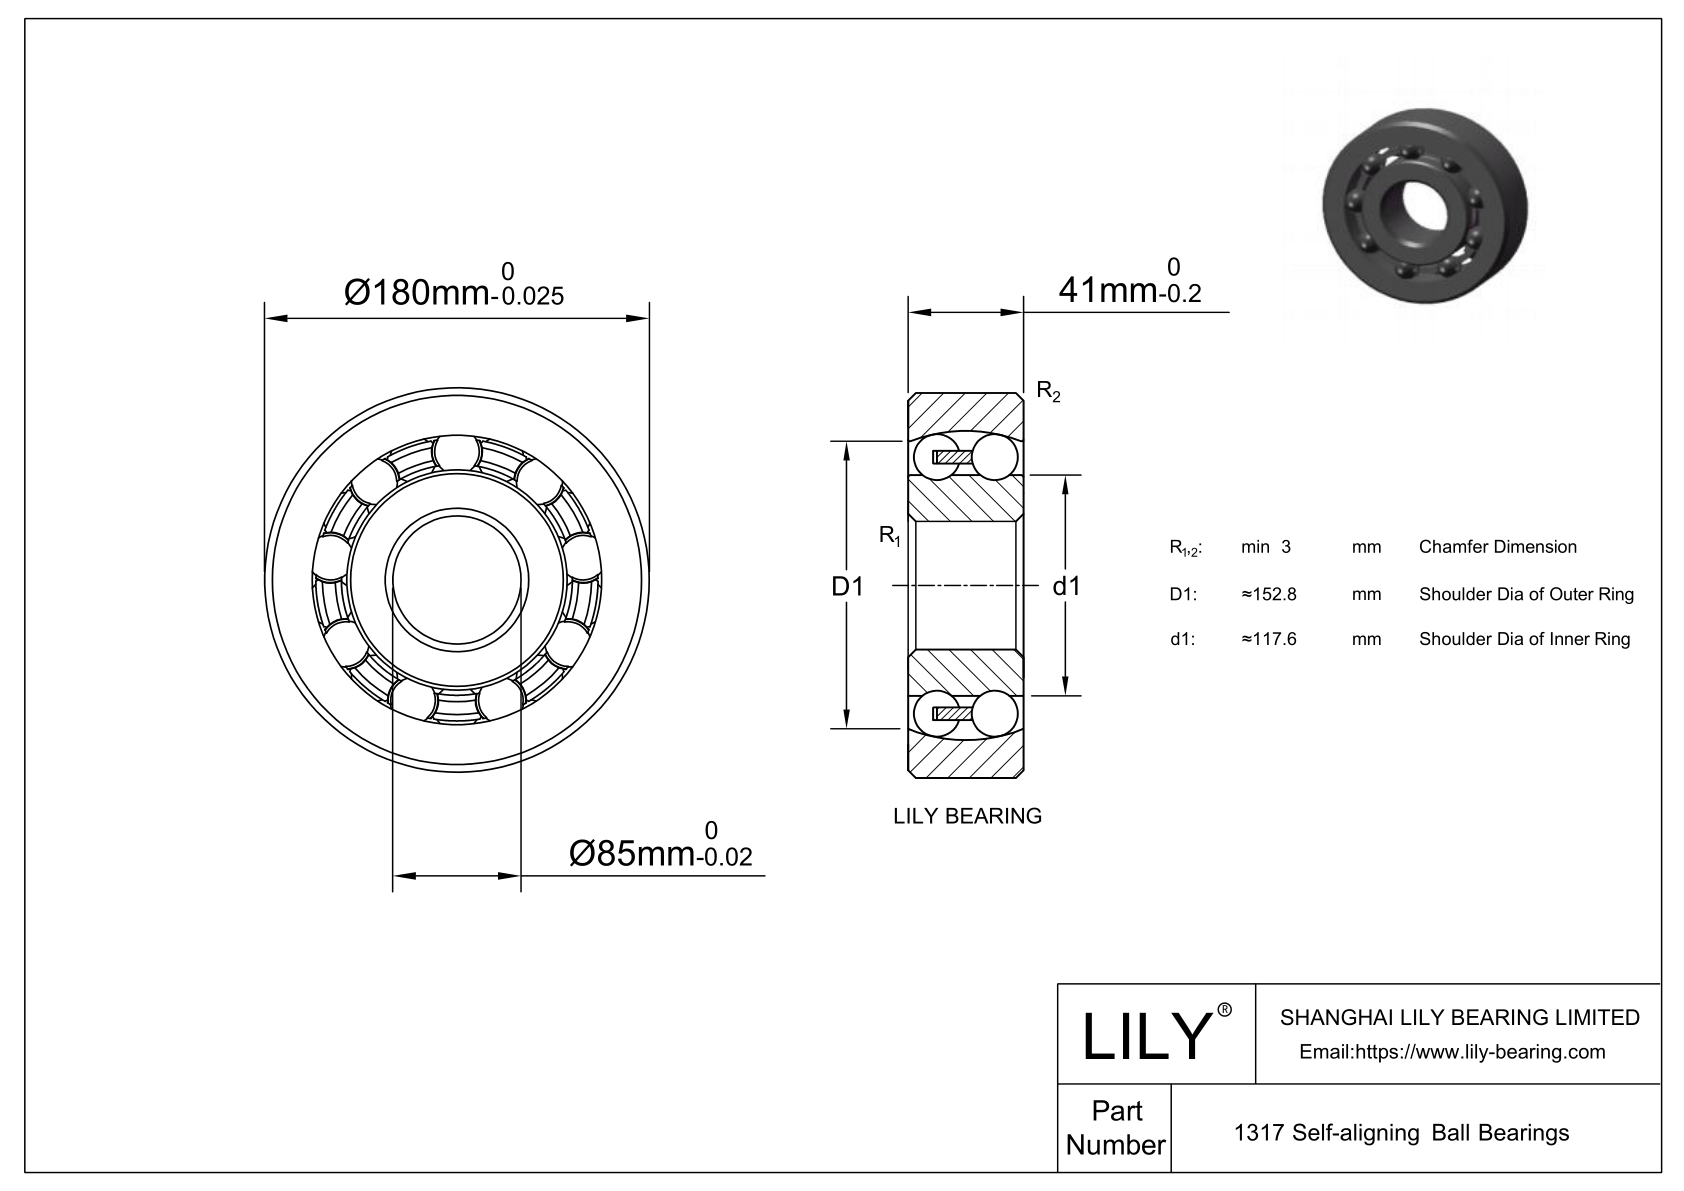 S1317 Stainless Steel Self Aligning Ball Bearings cad drawing